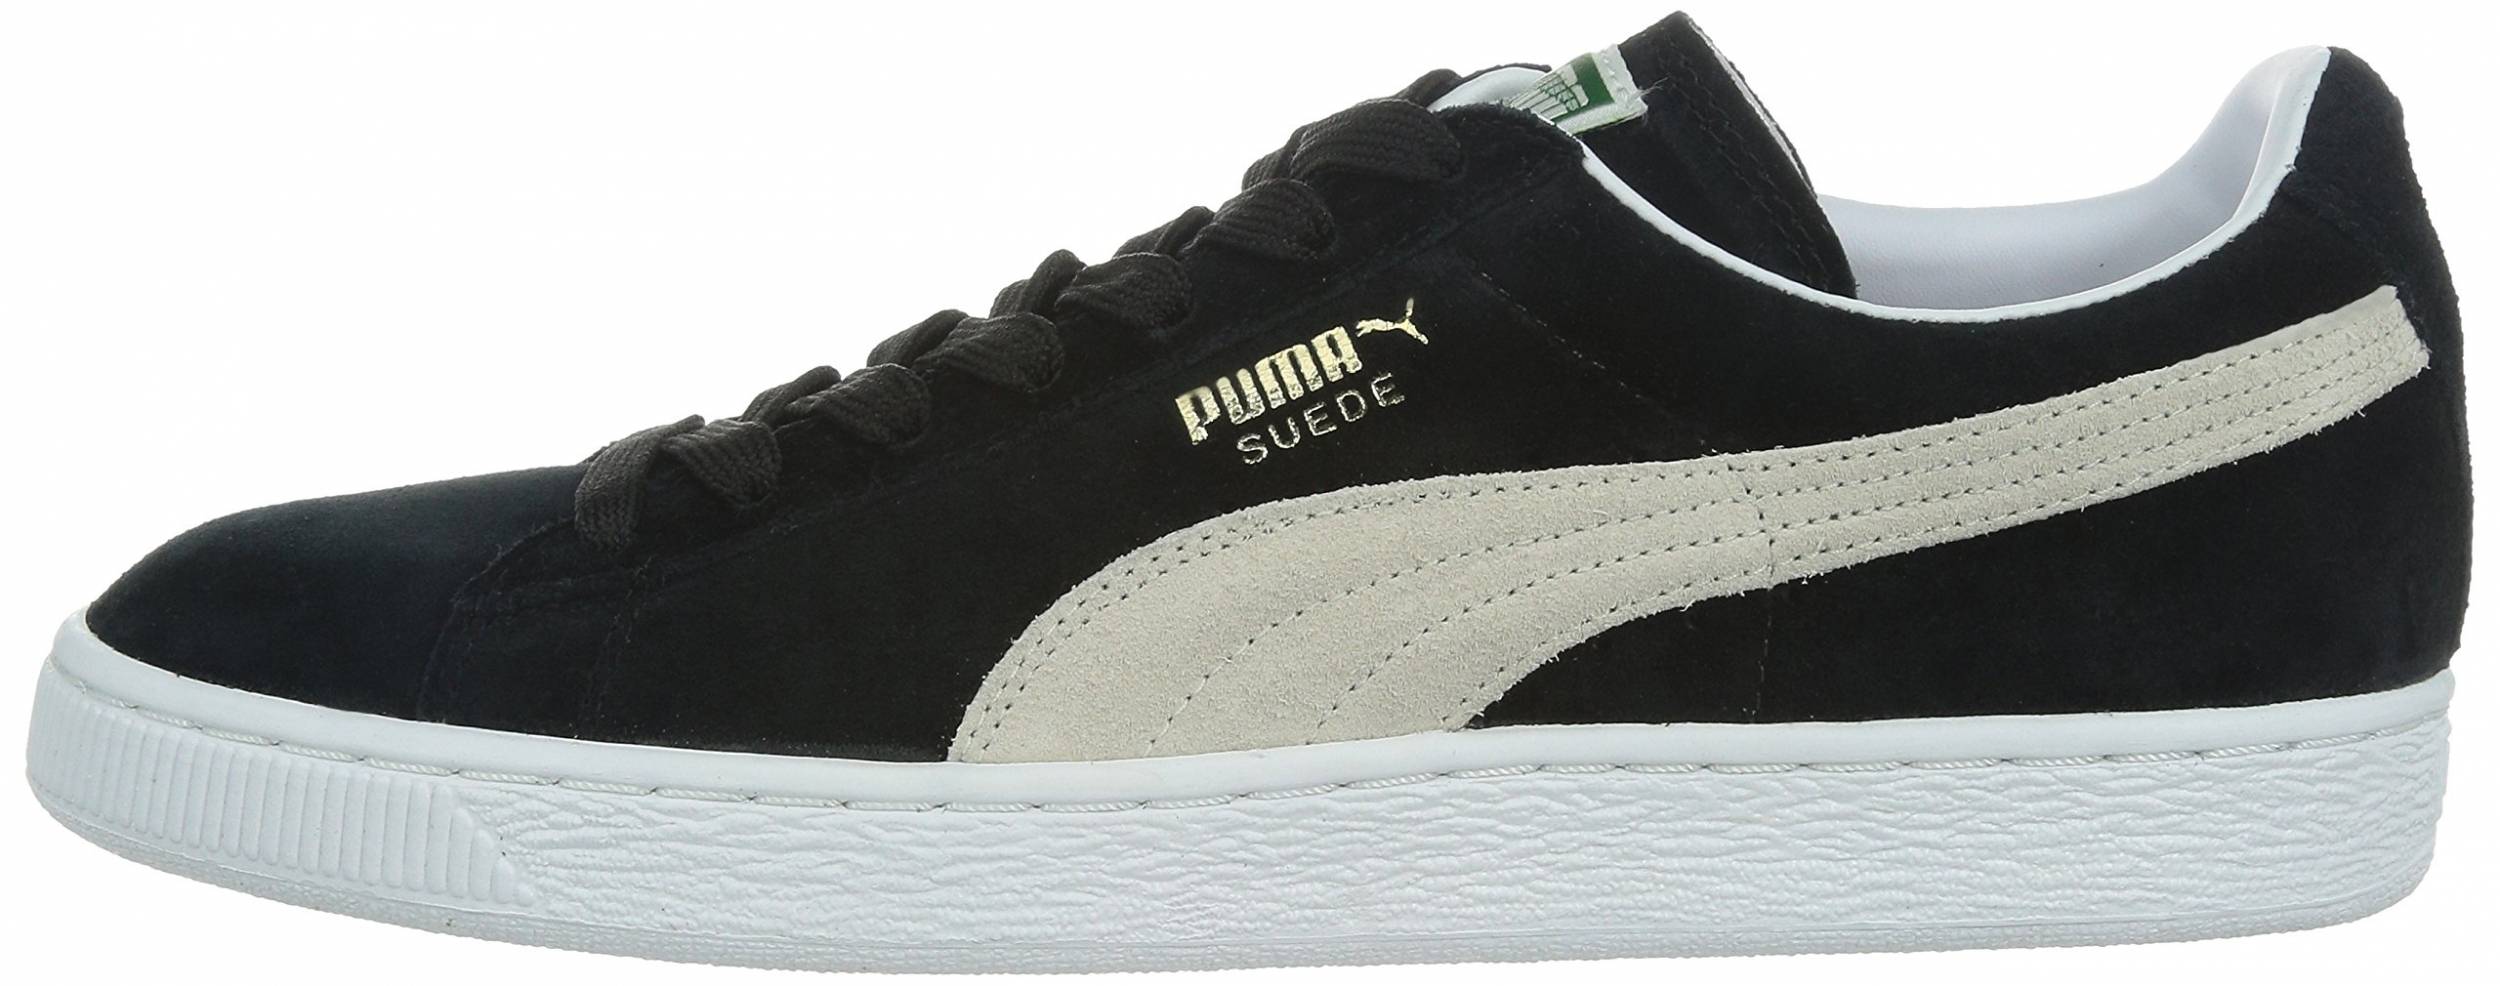 Save 49% on Puma Sneakers (285 Models 